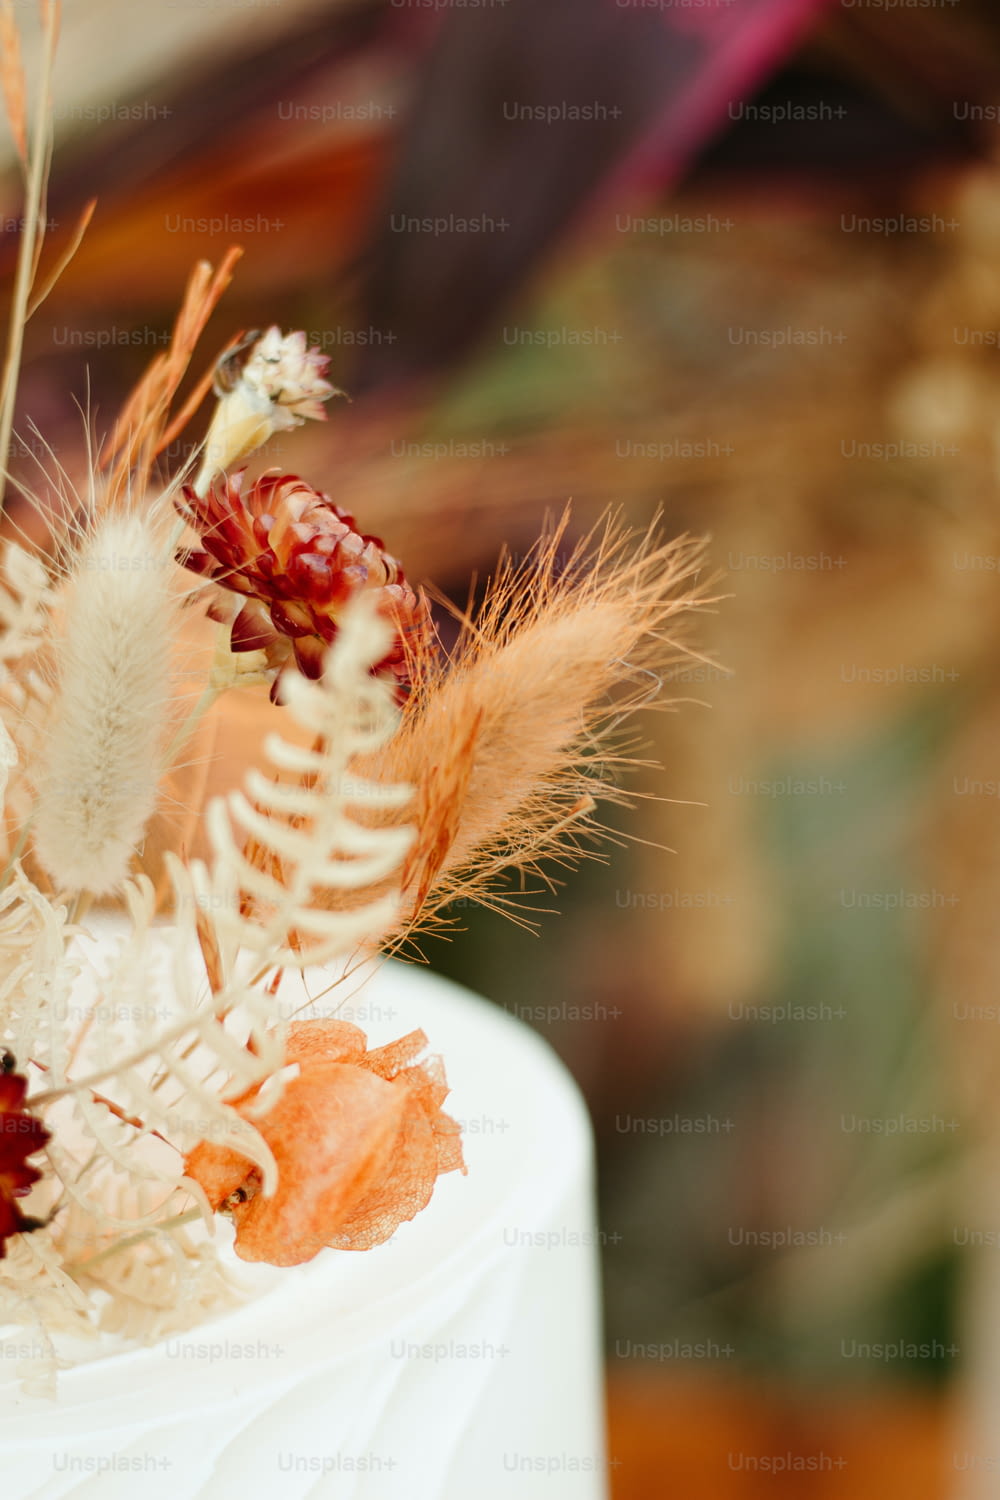 a close up of a cake decorated with dried flowers